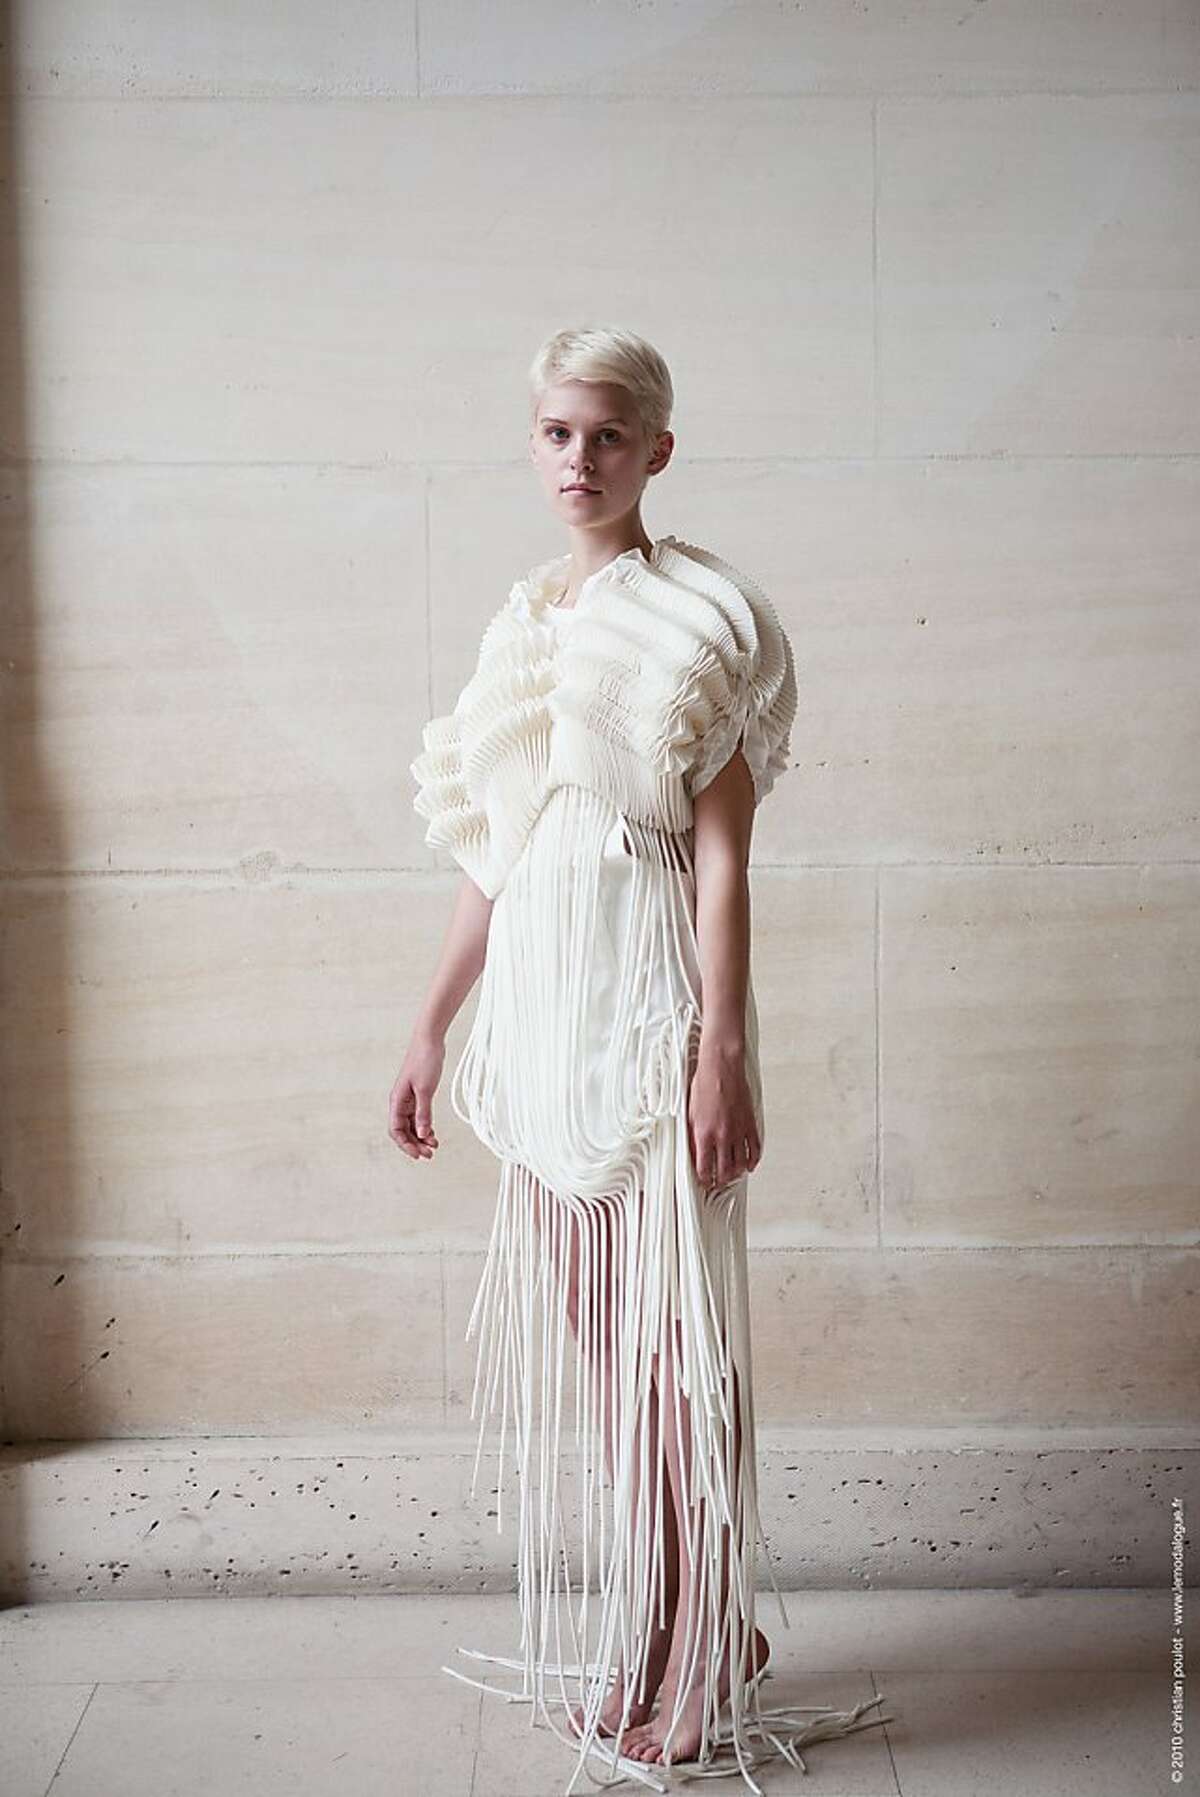 A design by Hong-lk University student Eunjin Song, who participated in the Summer Masterclass Paris in 2011. The masterclass was an intensive four-week session that focused on haute couture pleating techniques.